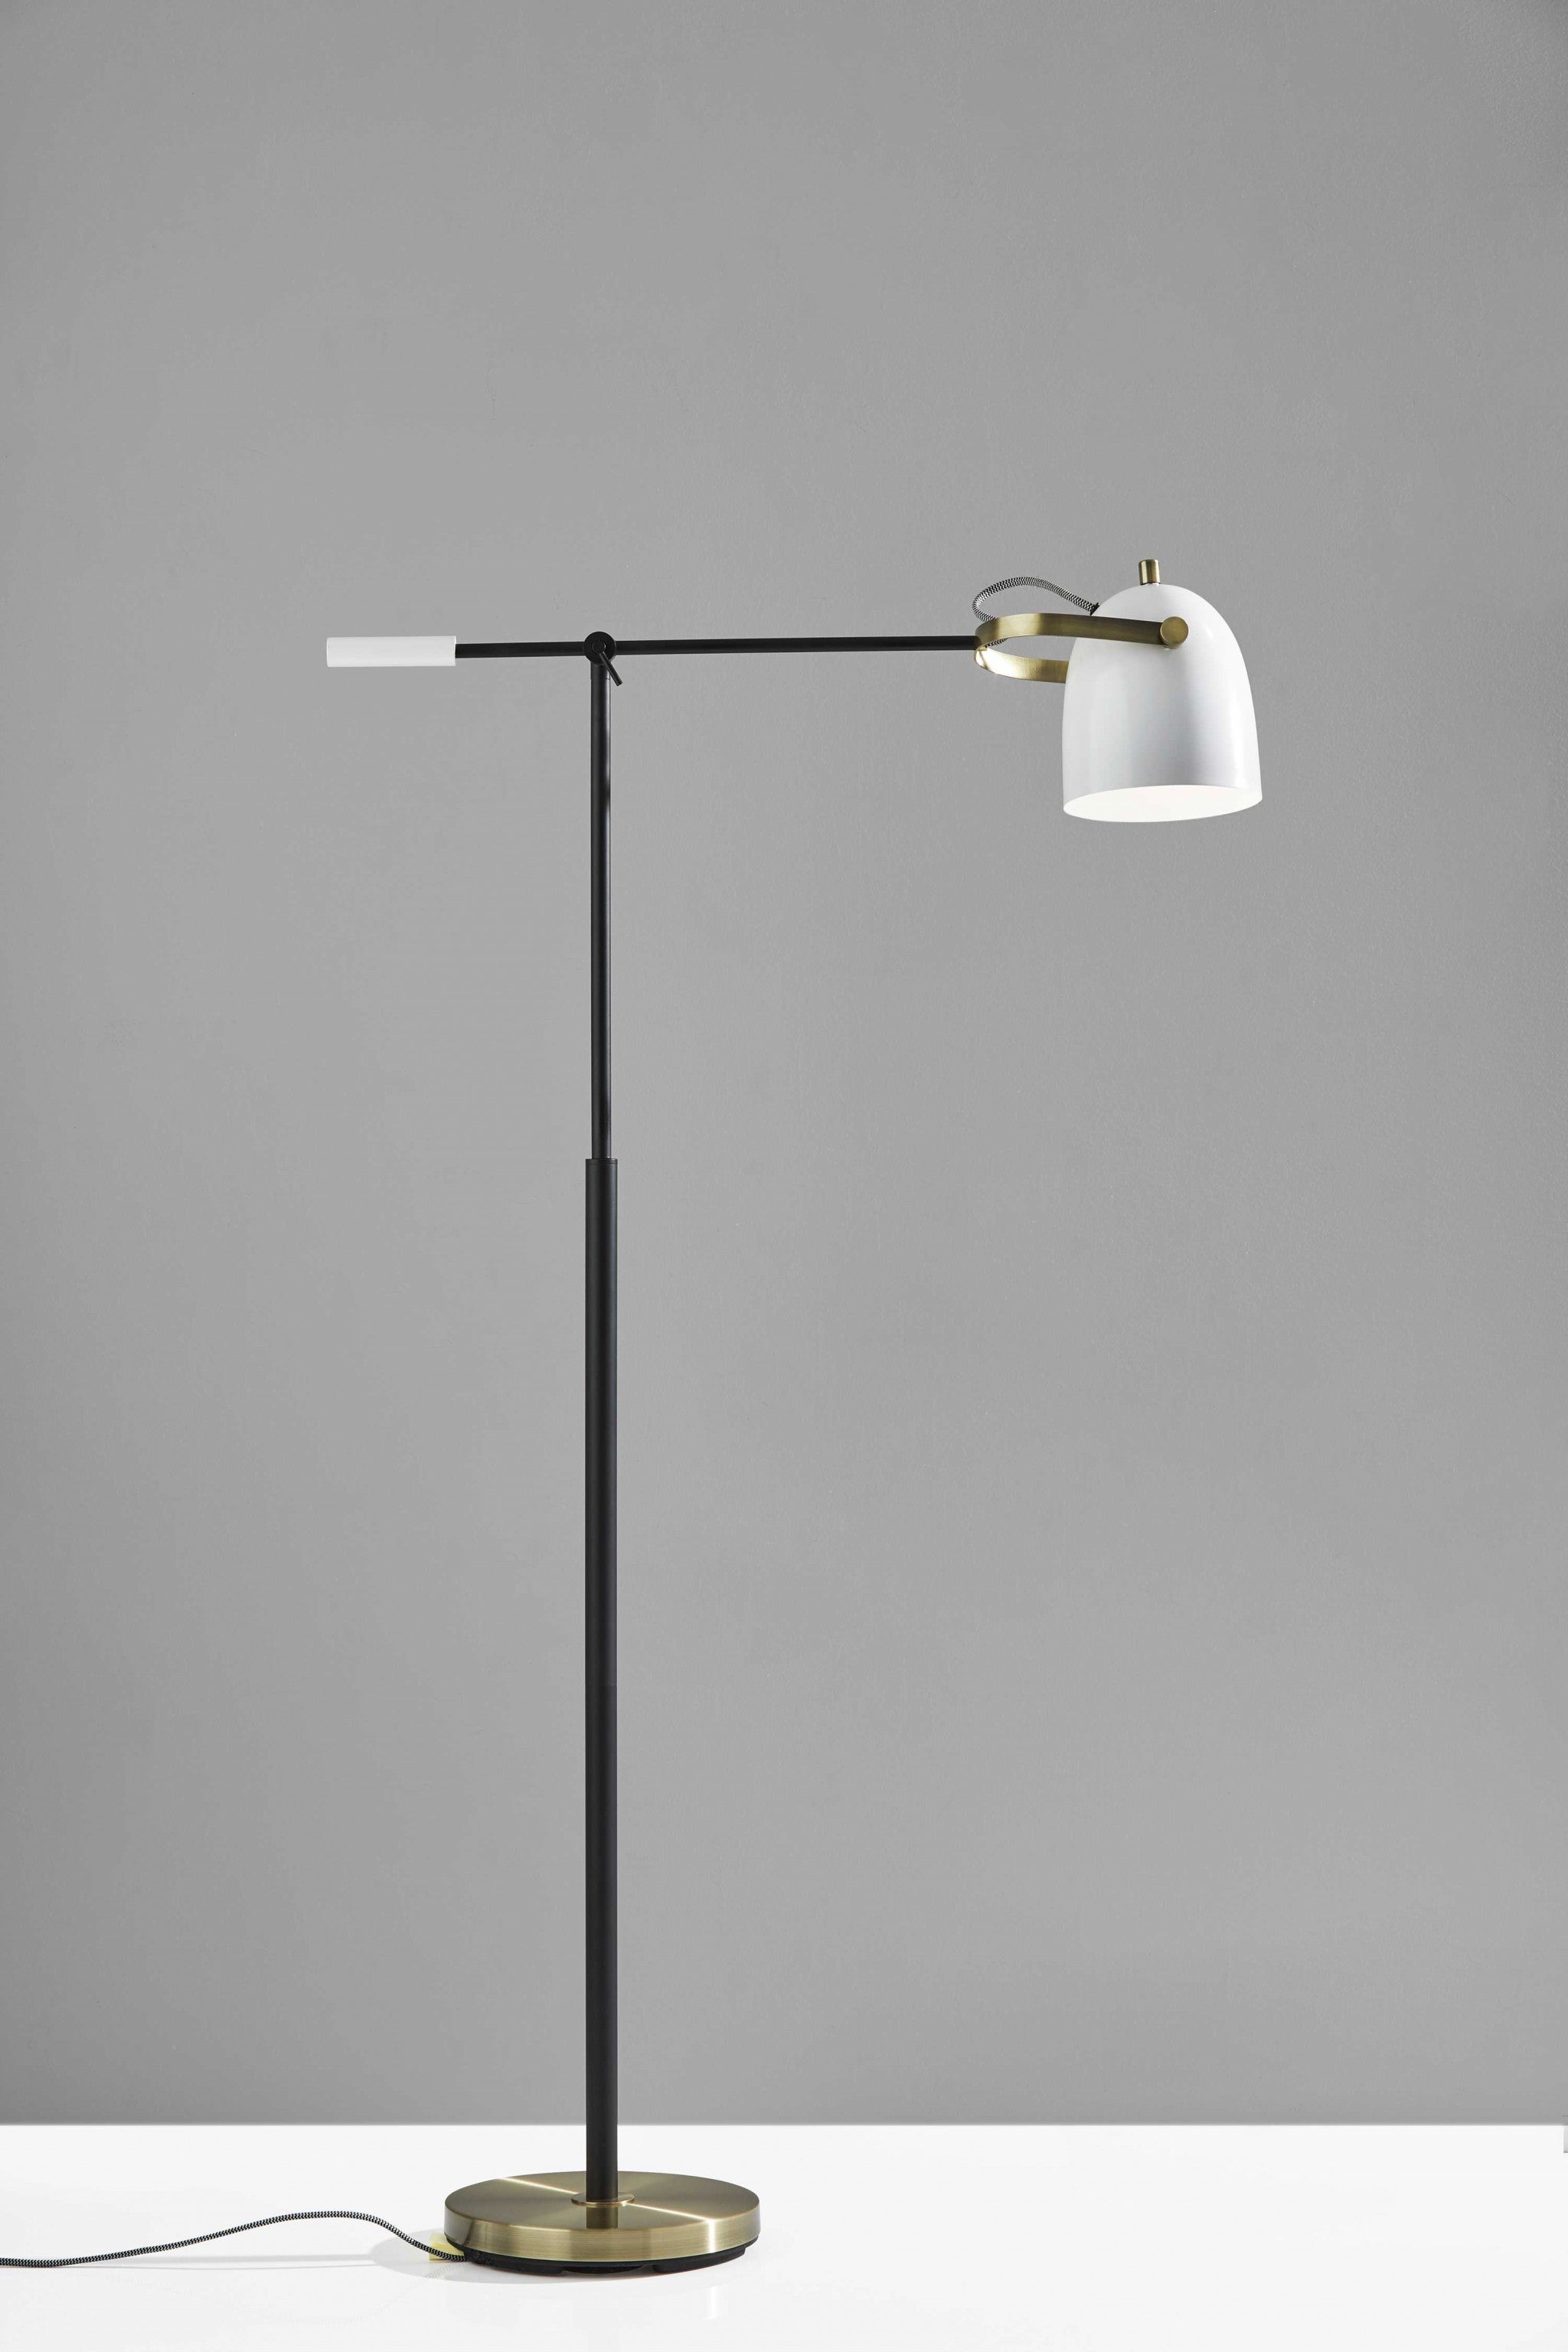 65" Gold Task Floor Lamp With White Bowl Shade